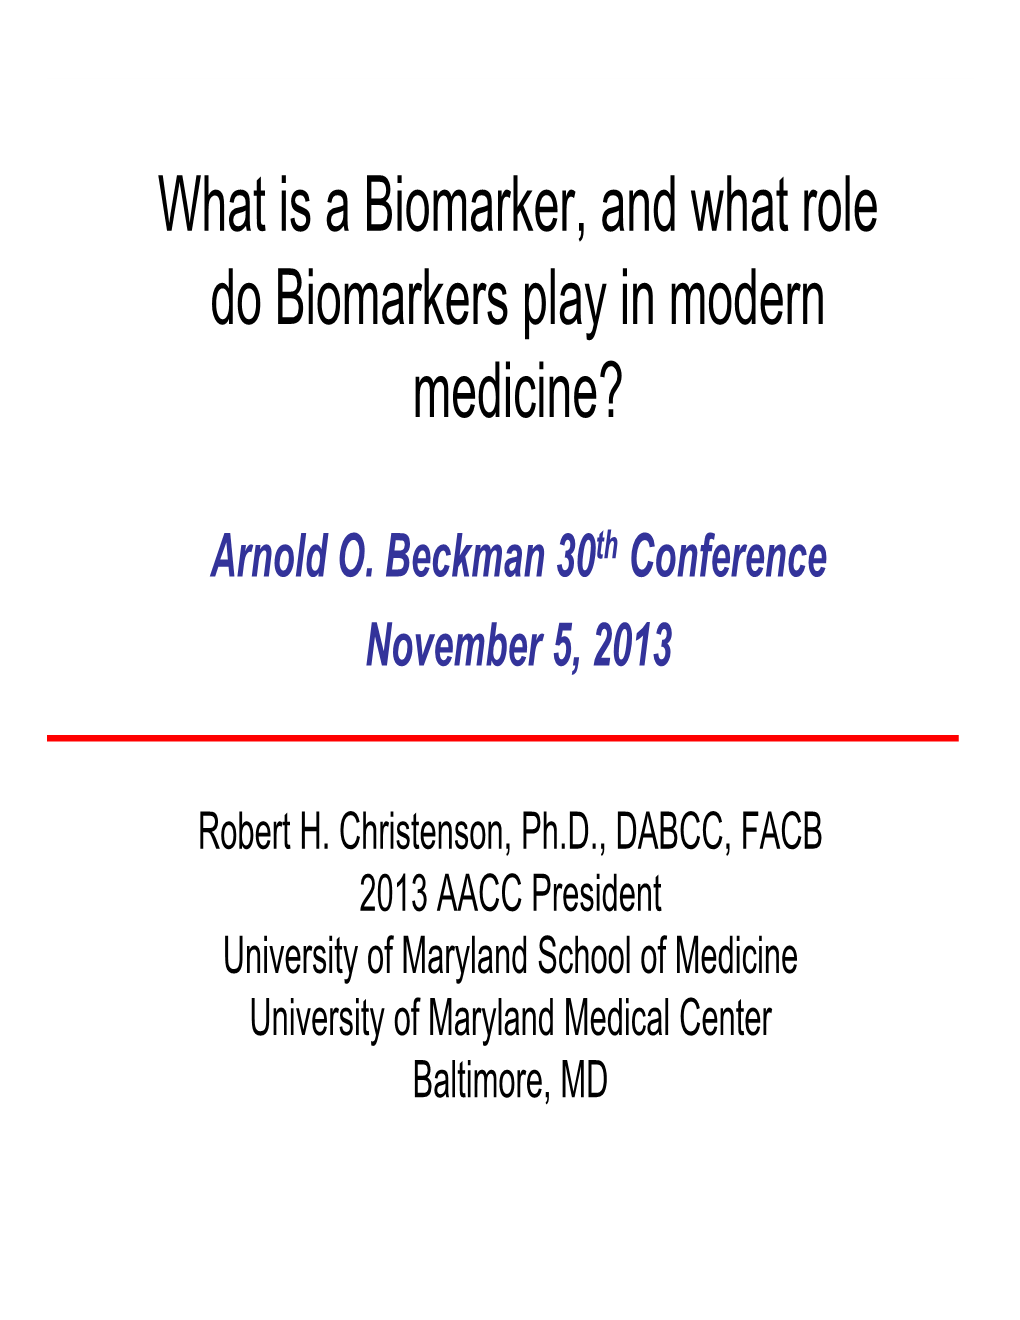 Biomarker, and What Role Do Biomarkers Play in Modern Medicine?